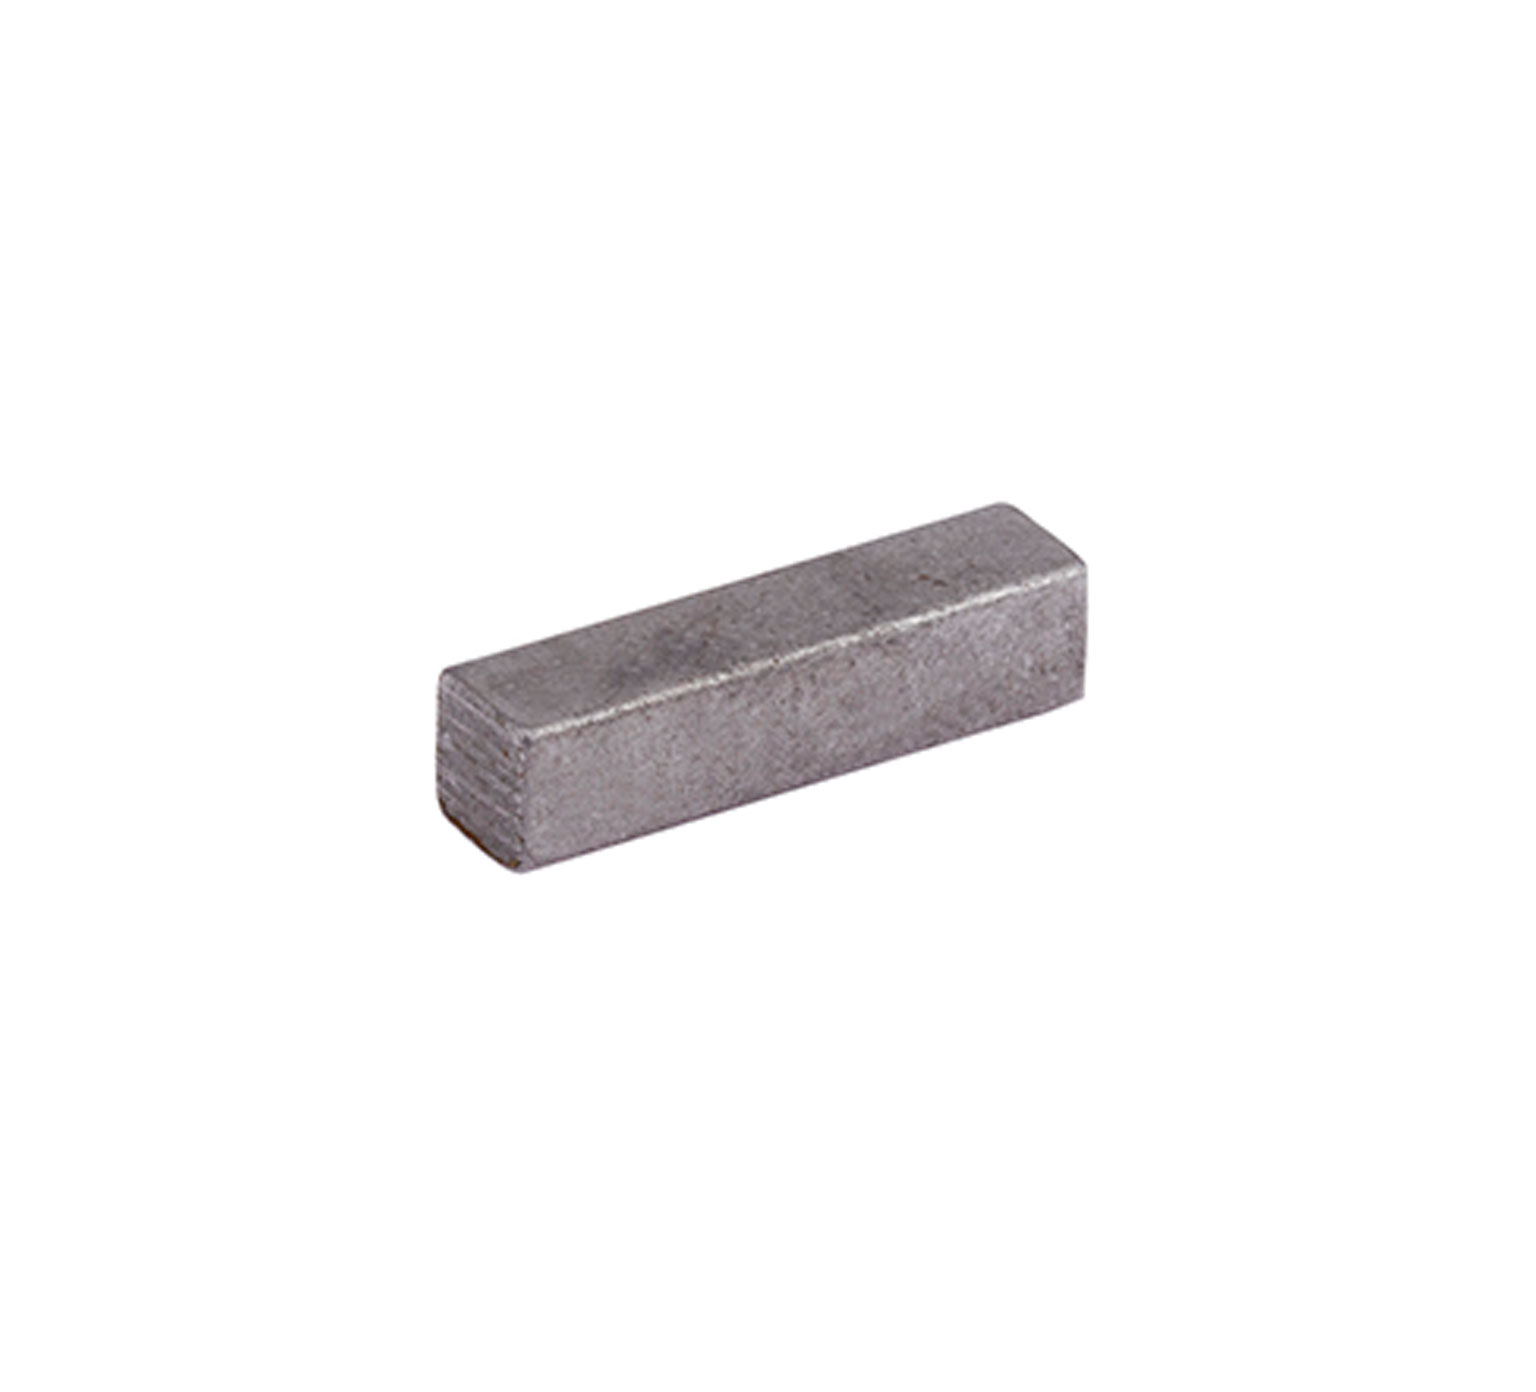 00928 Cold Rolled Steel Key - 2.5 x 2.5 x 1 in alt 1